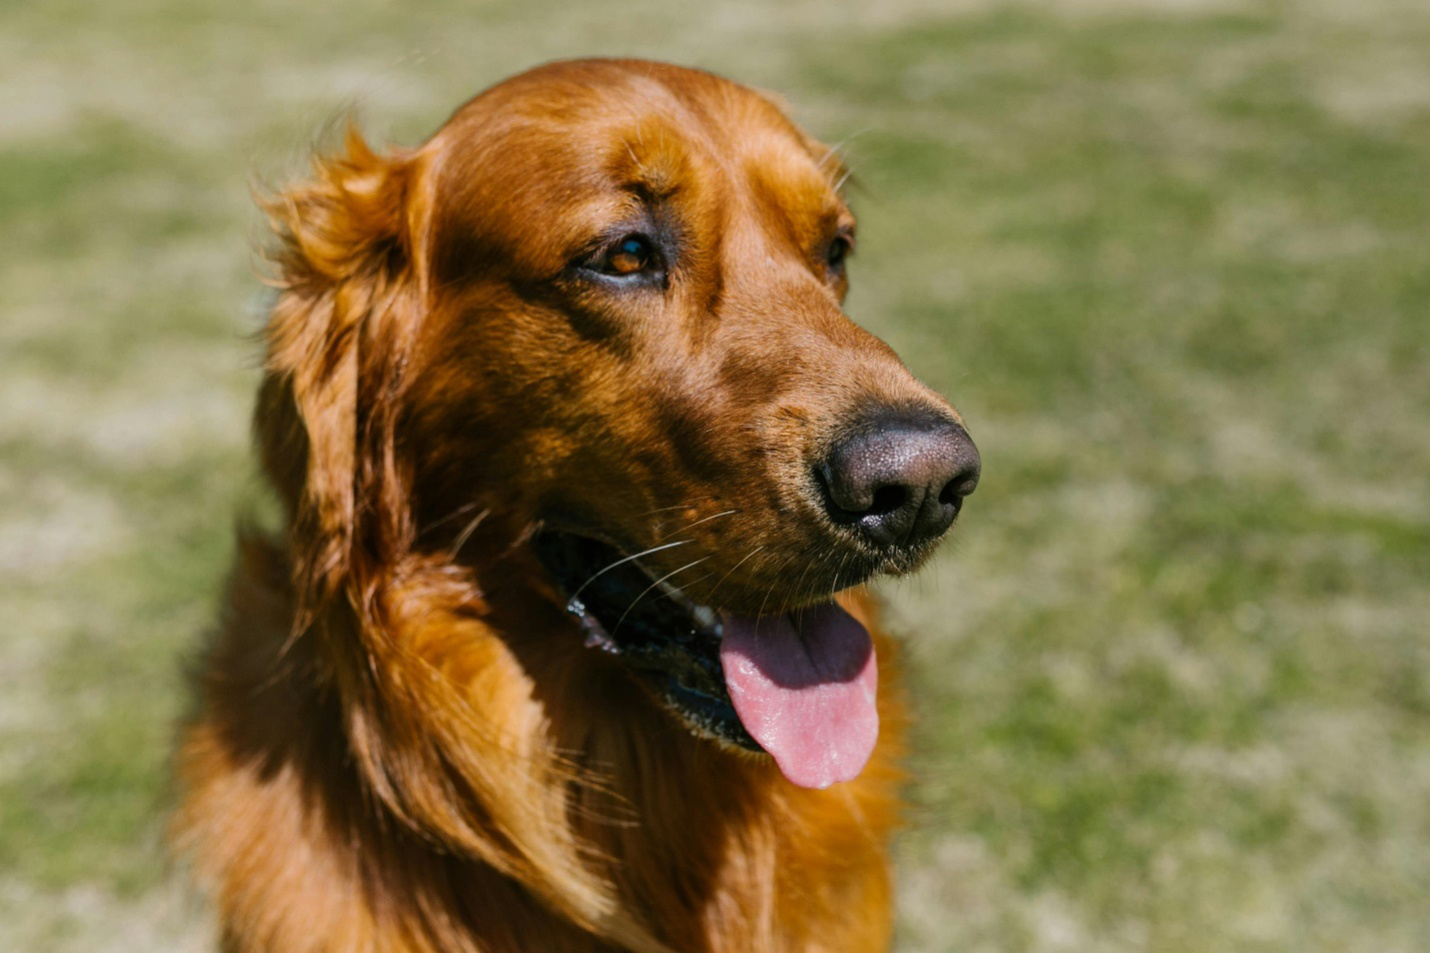 A close-up shot of a brown dog pictured outdoors during playtime at a dog boarding facility.